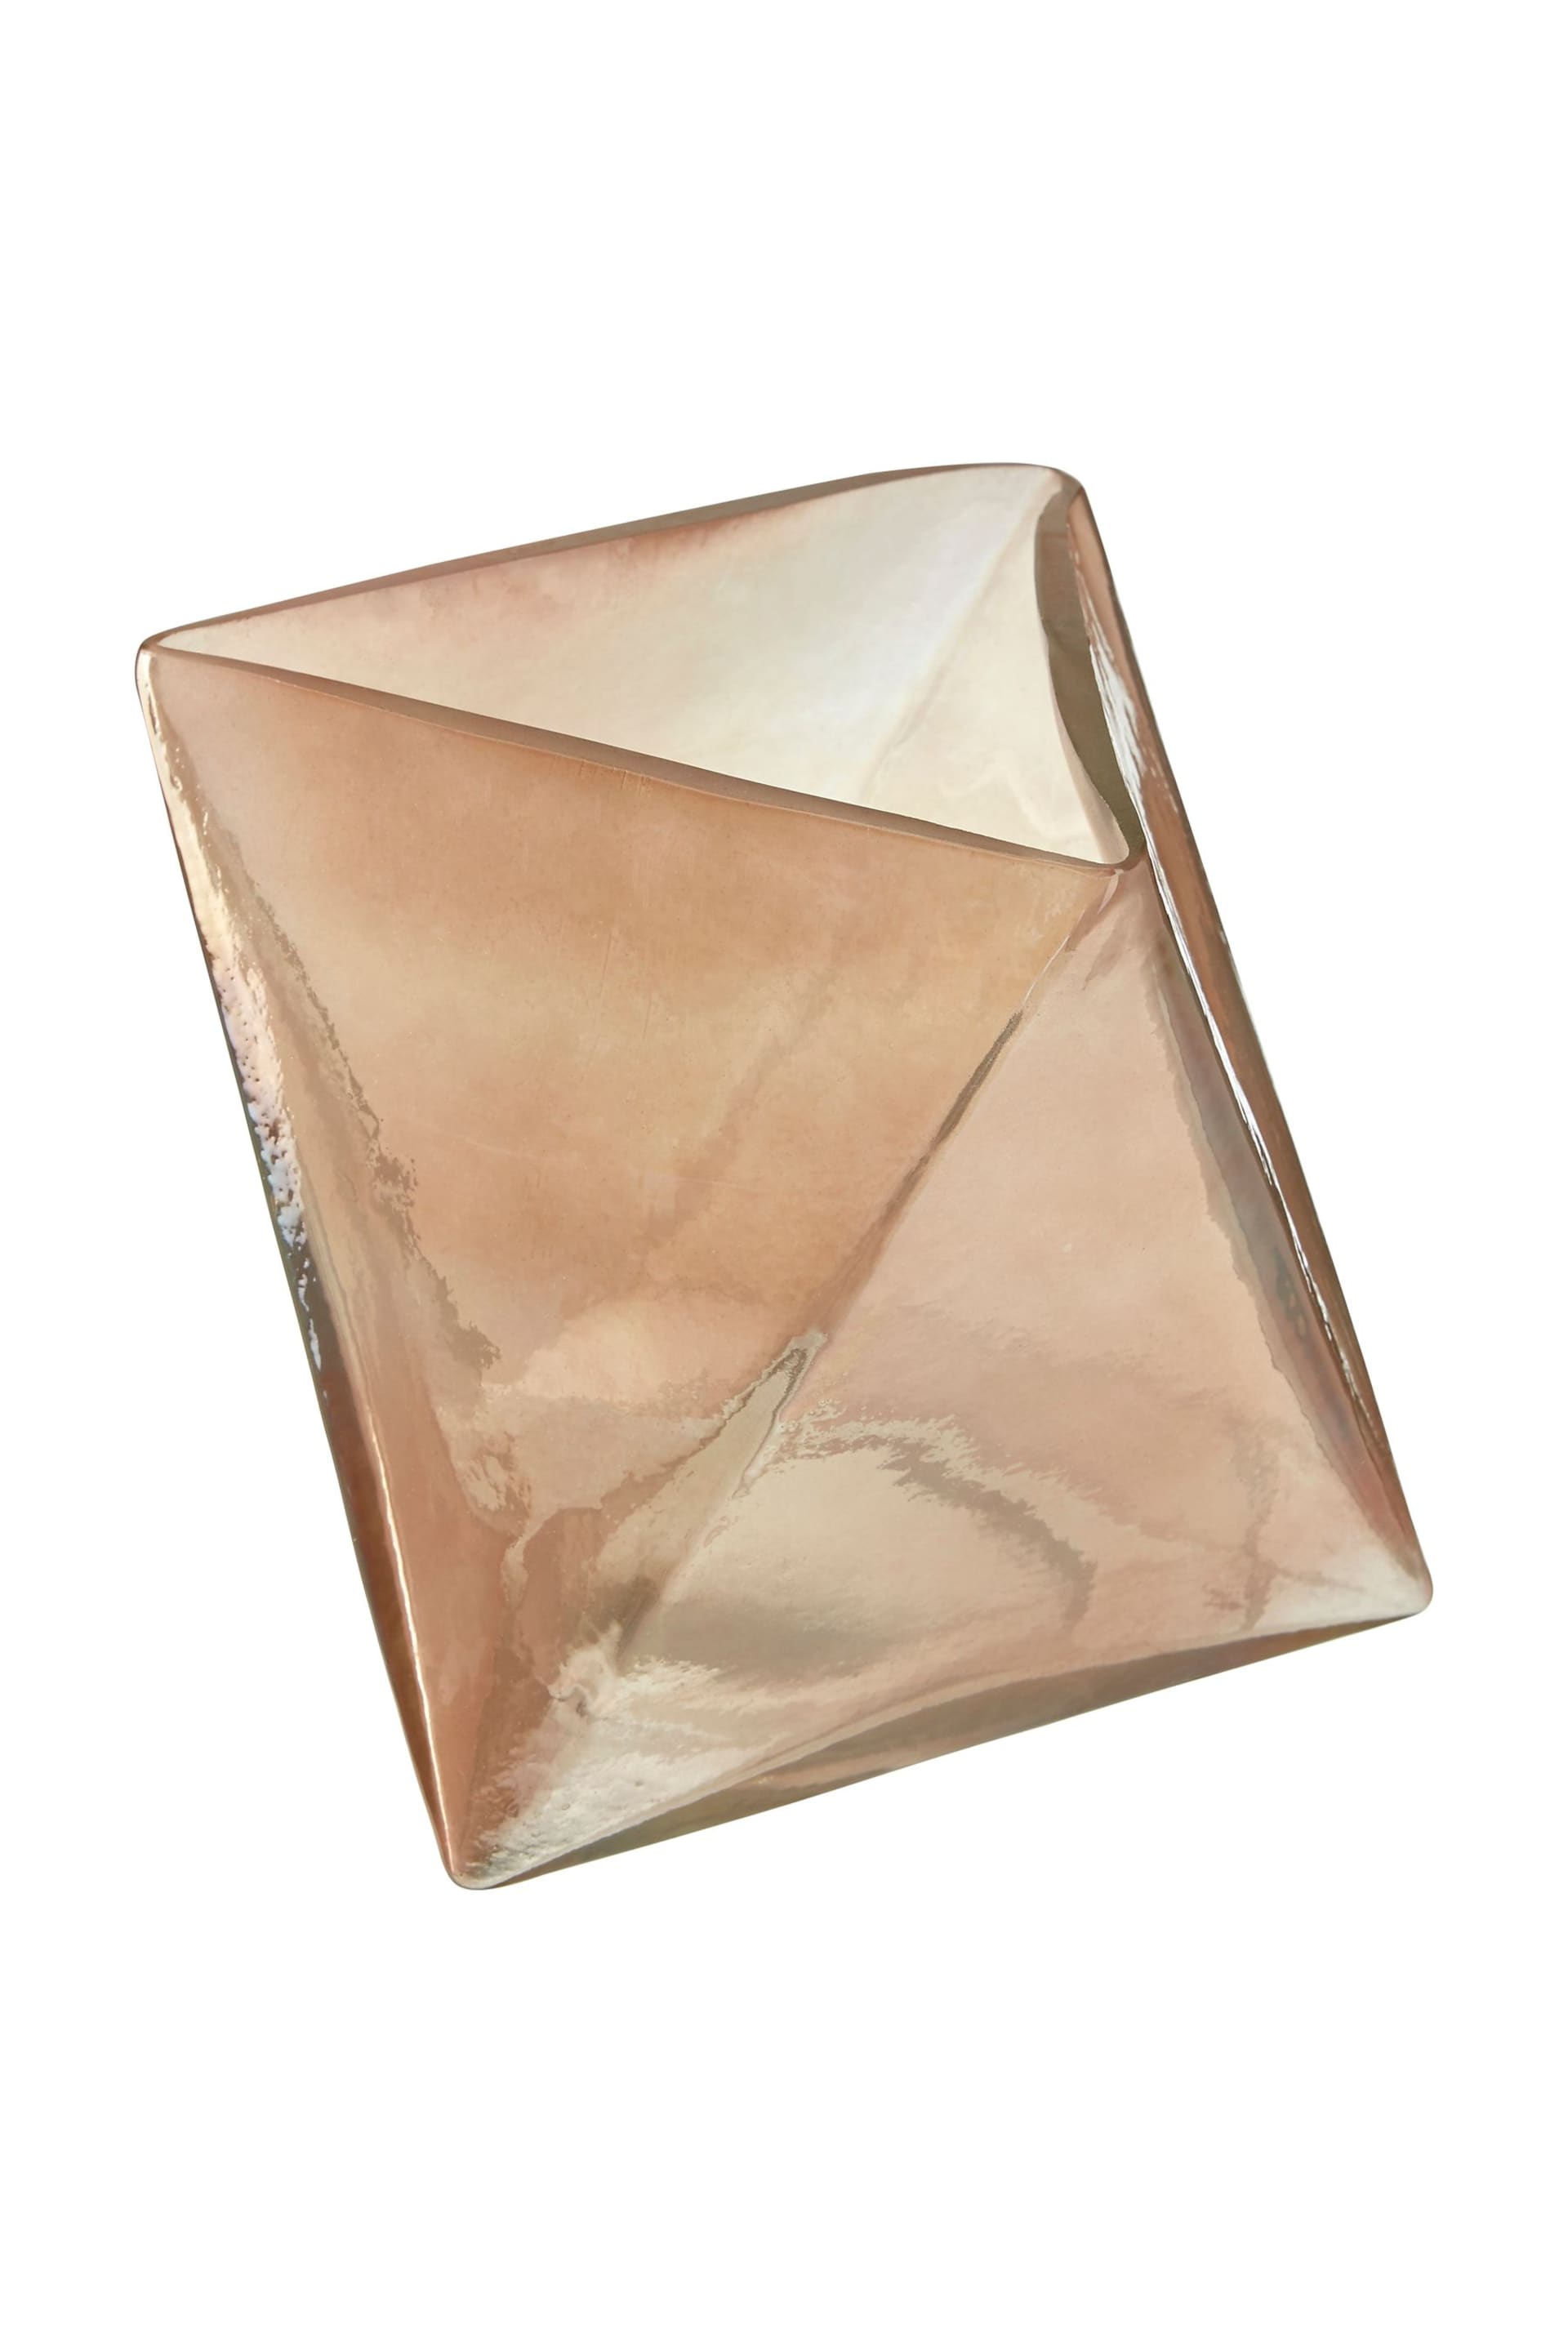 Fifty Five South Bronze Pink Candle Holder - Image 3 of 4